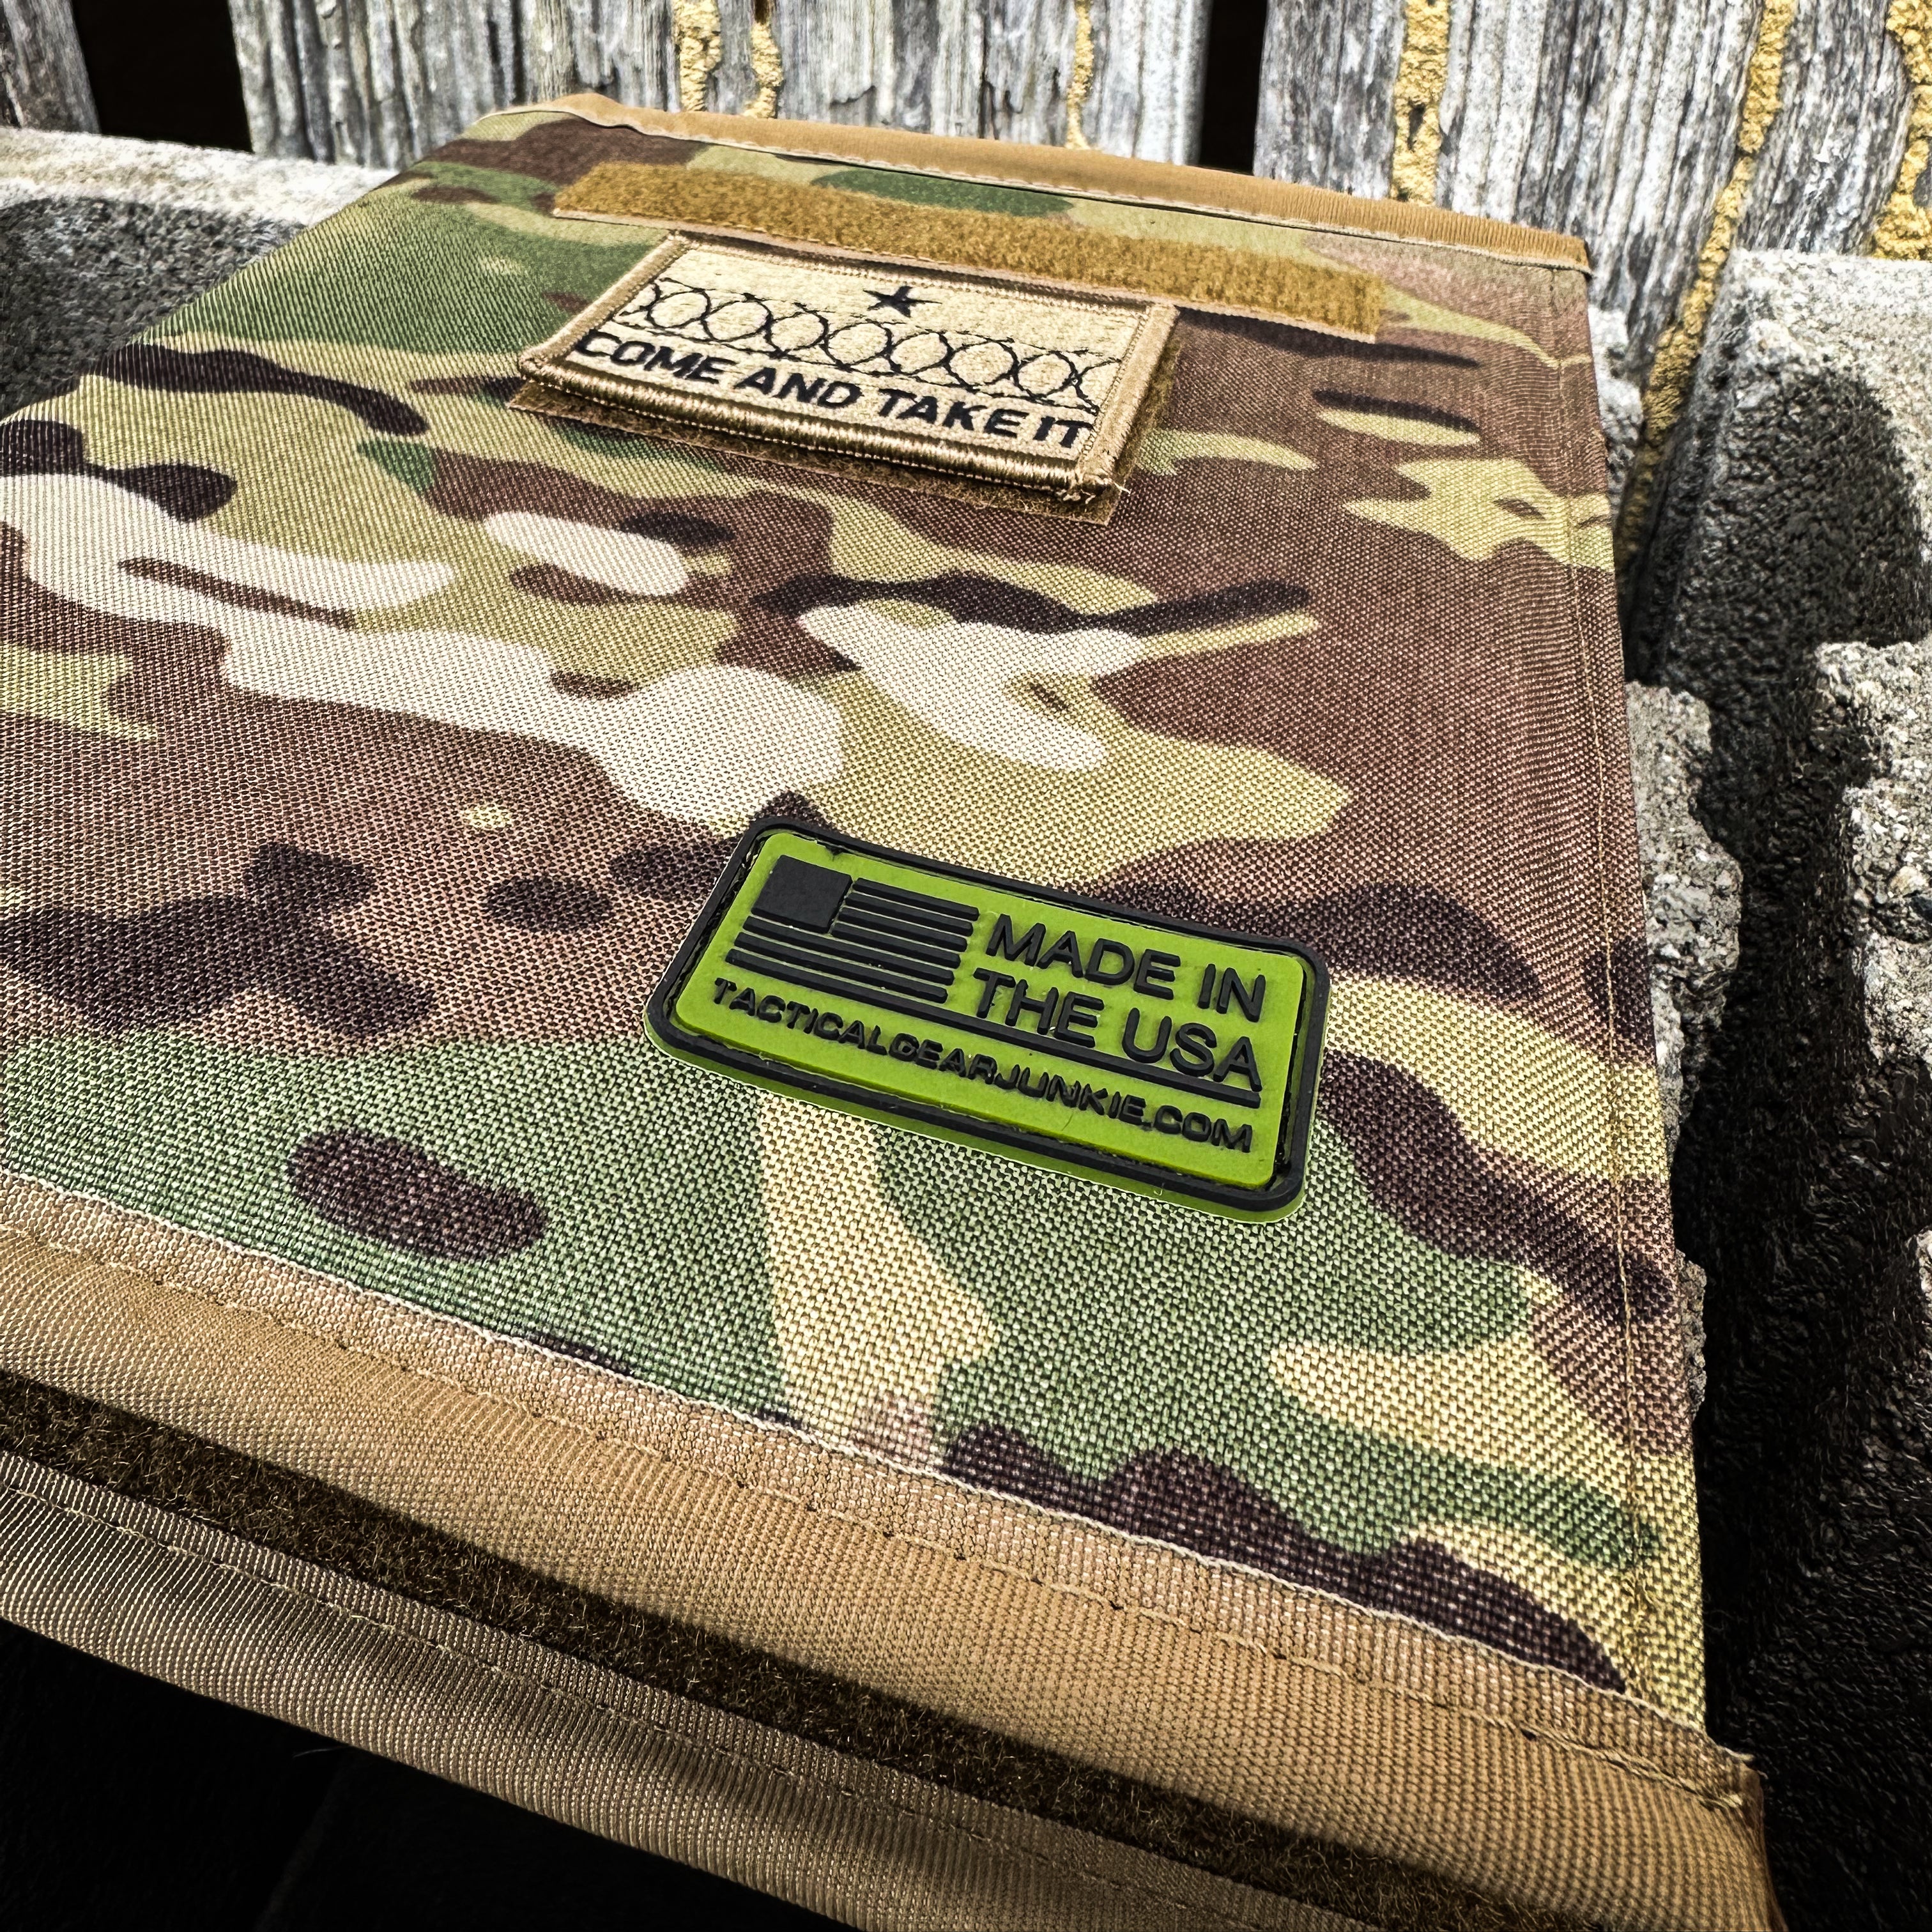 V.2.0 - Tactical Patch Book - American Made